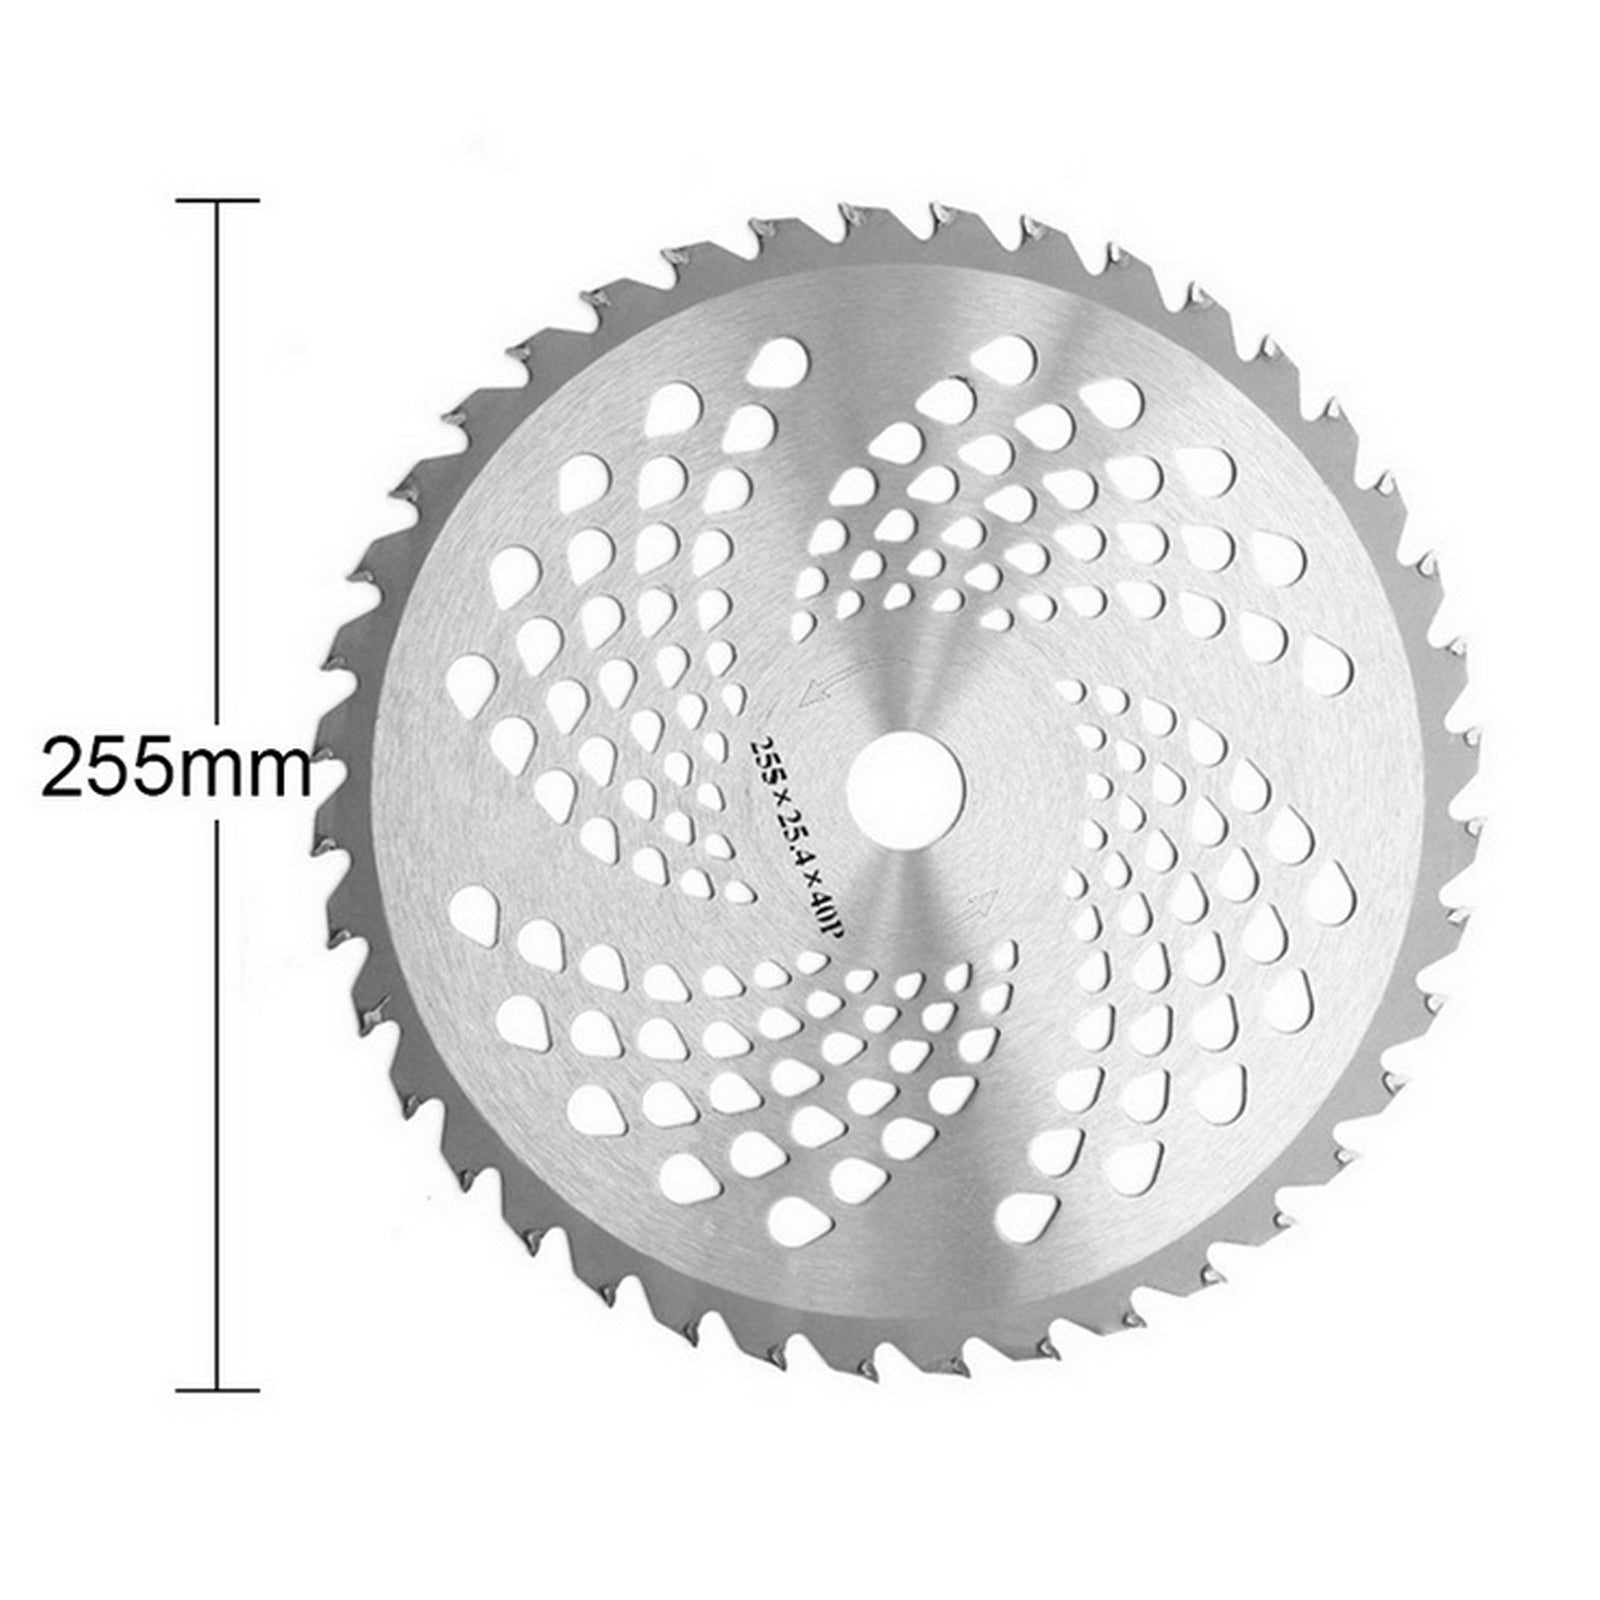 Lawn Mower Circular Saw Blade - Durable Cutting Tool for Grass Cutting and Trimming